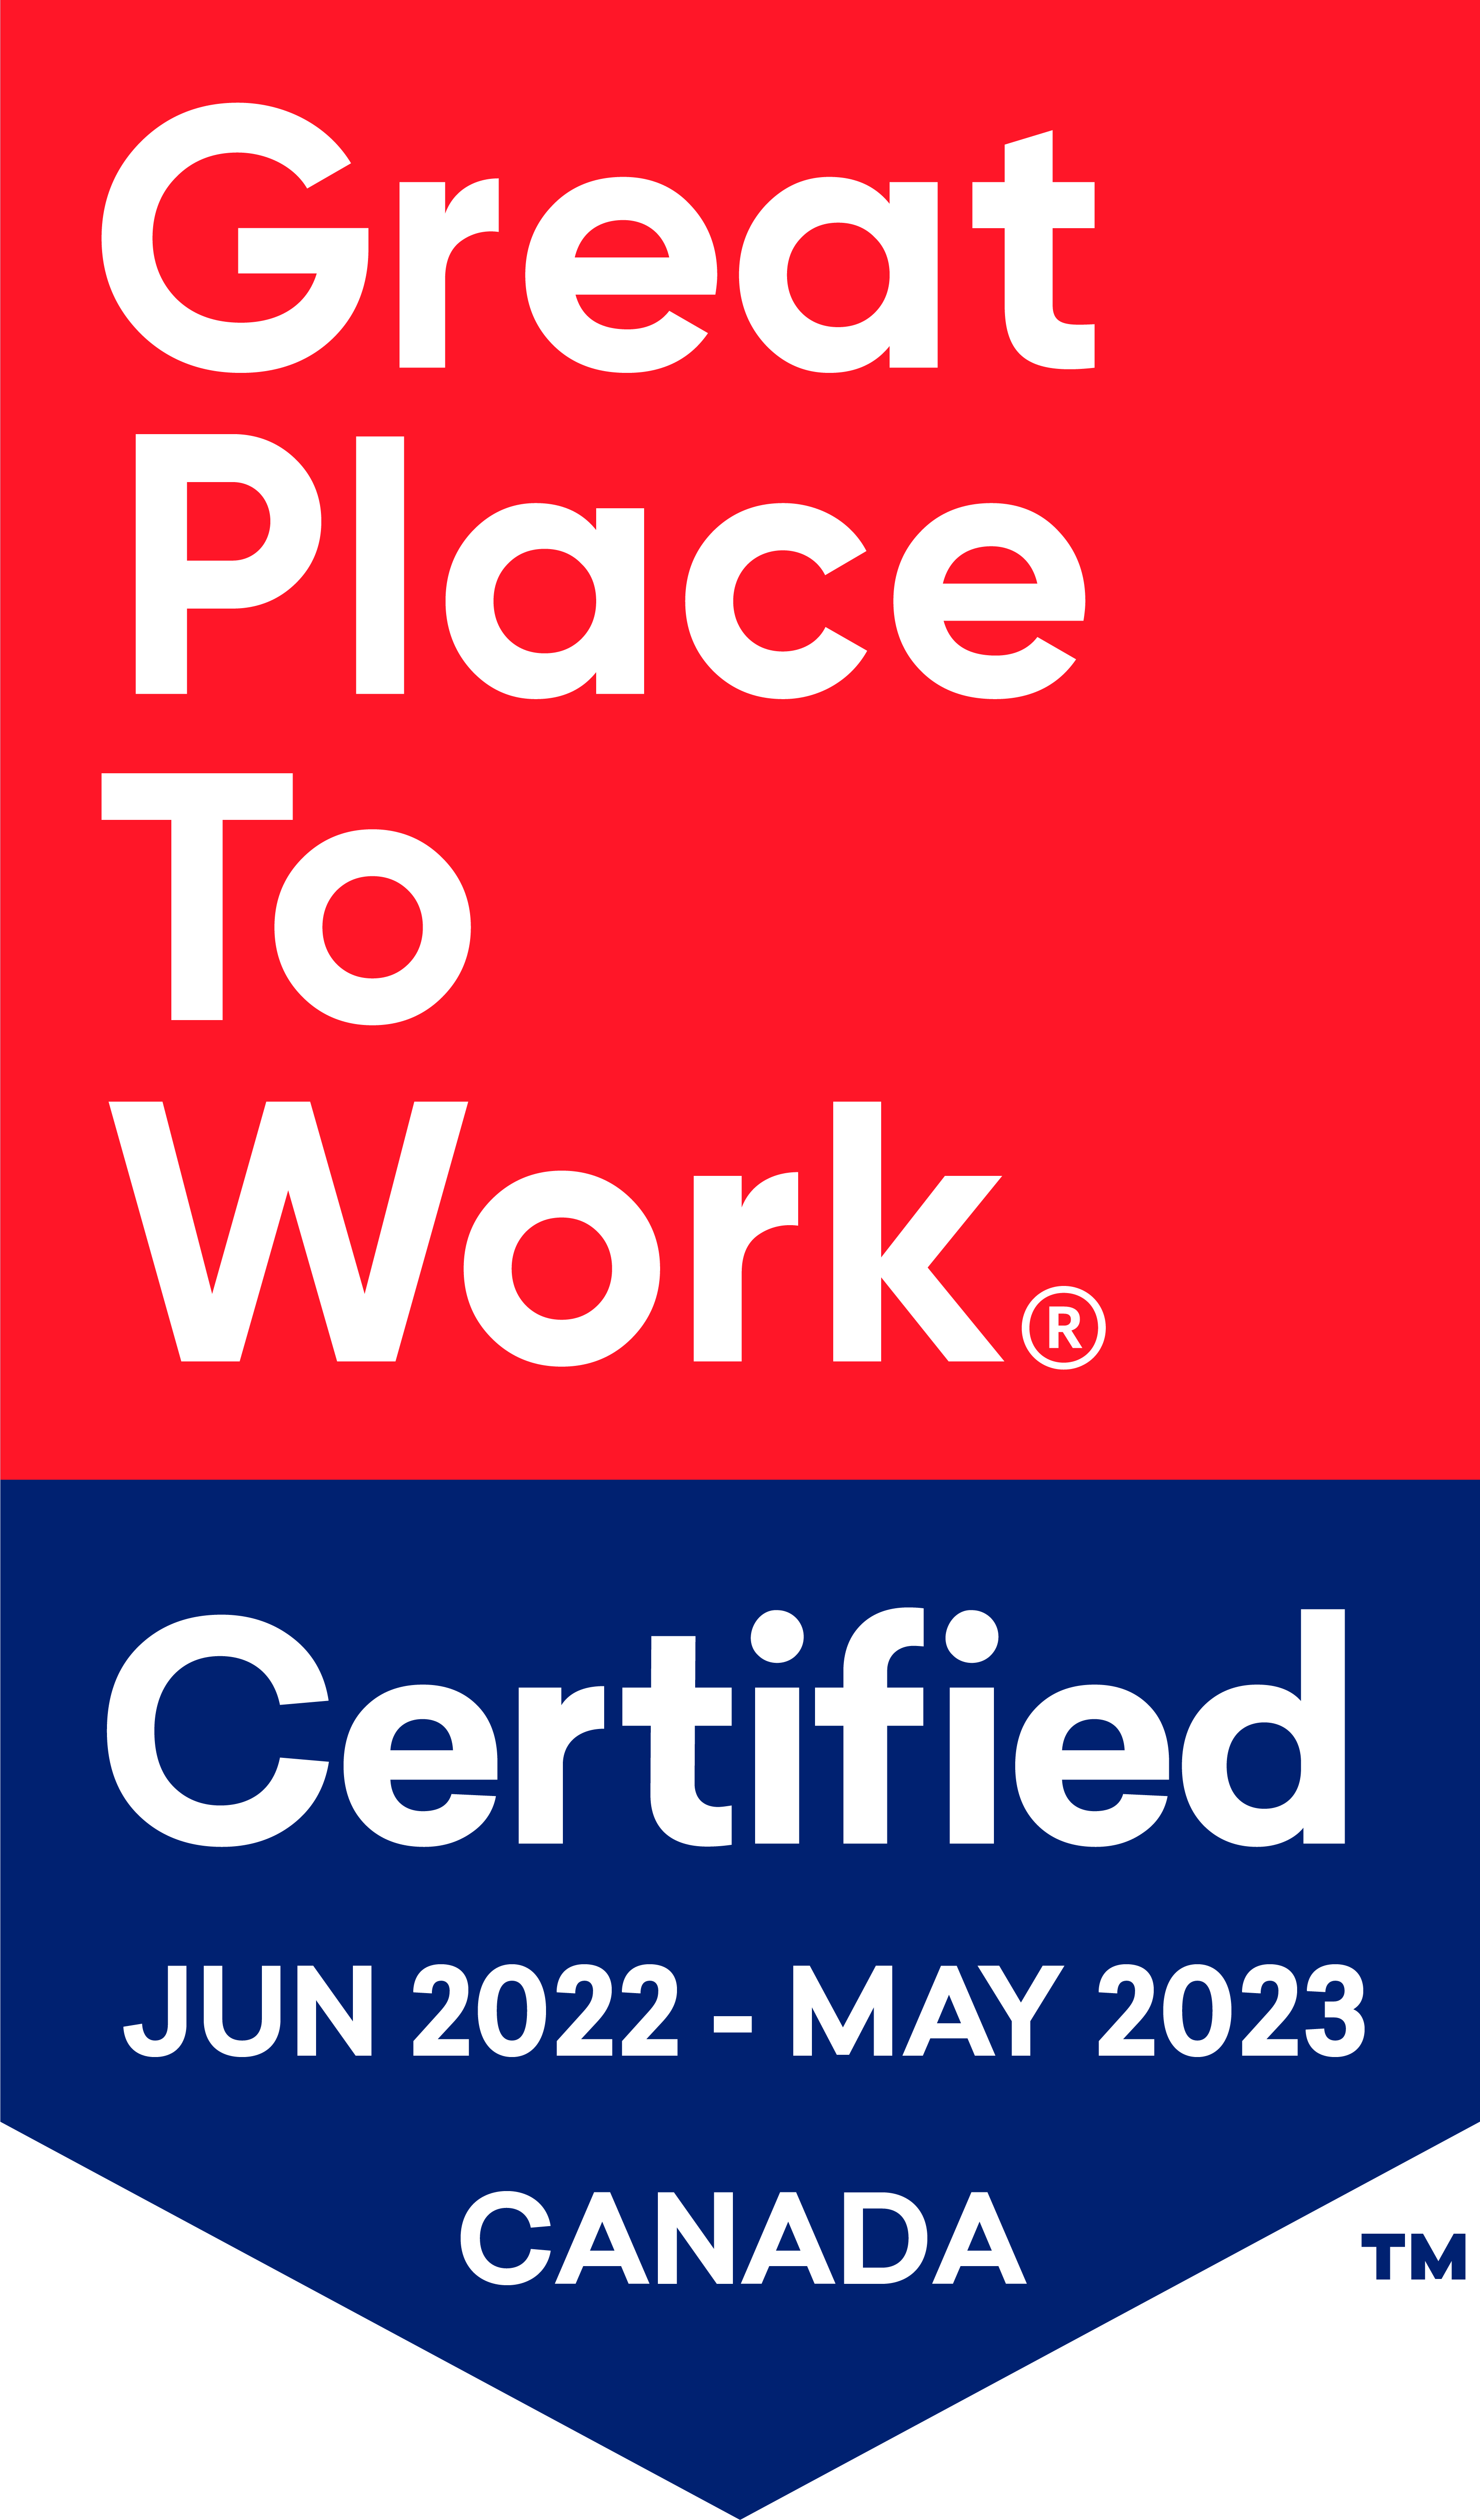 Great Place To Work Certified June 2022 - May 2023 Canada